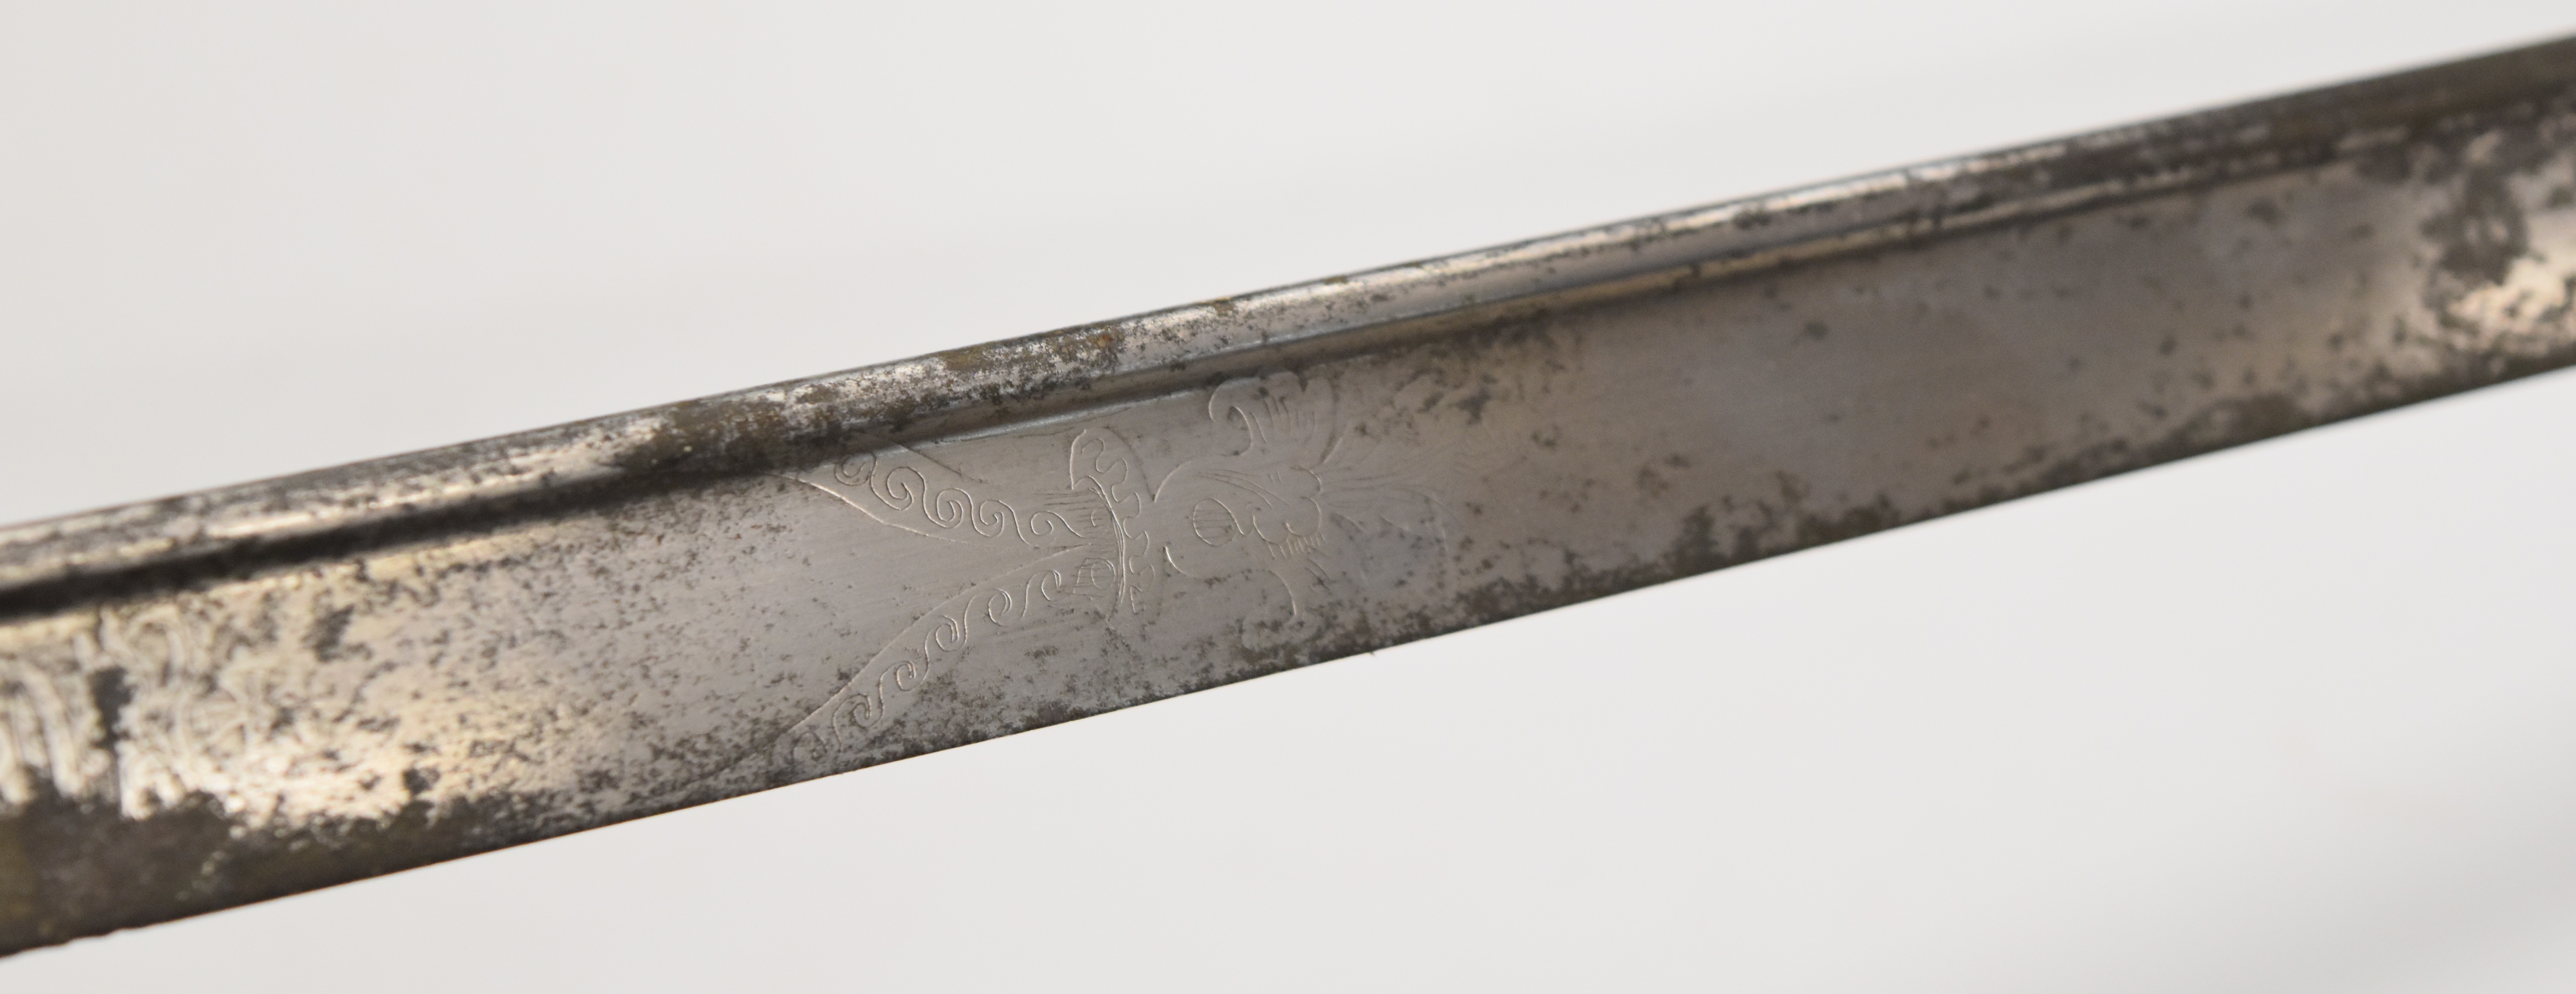 Royal Navy 1827 pattern sword with lion head pommel, folding inner guard and fouled anchor motif, - Image 7 of 11